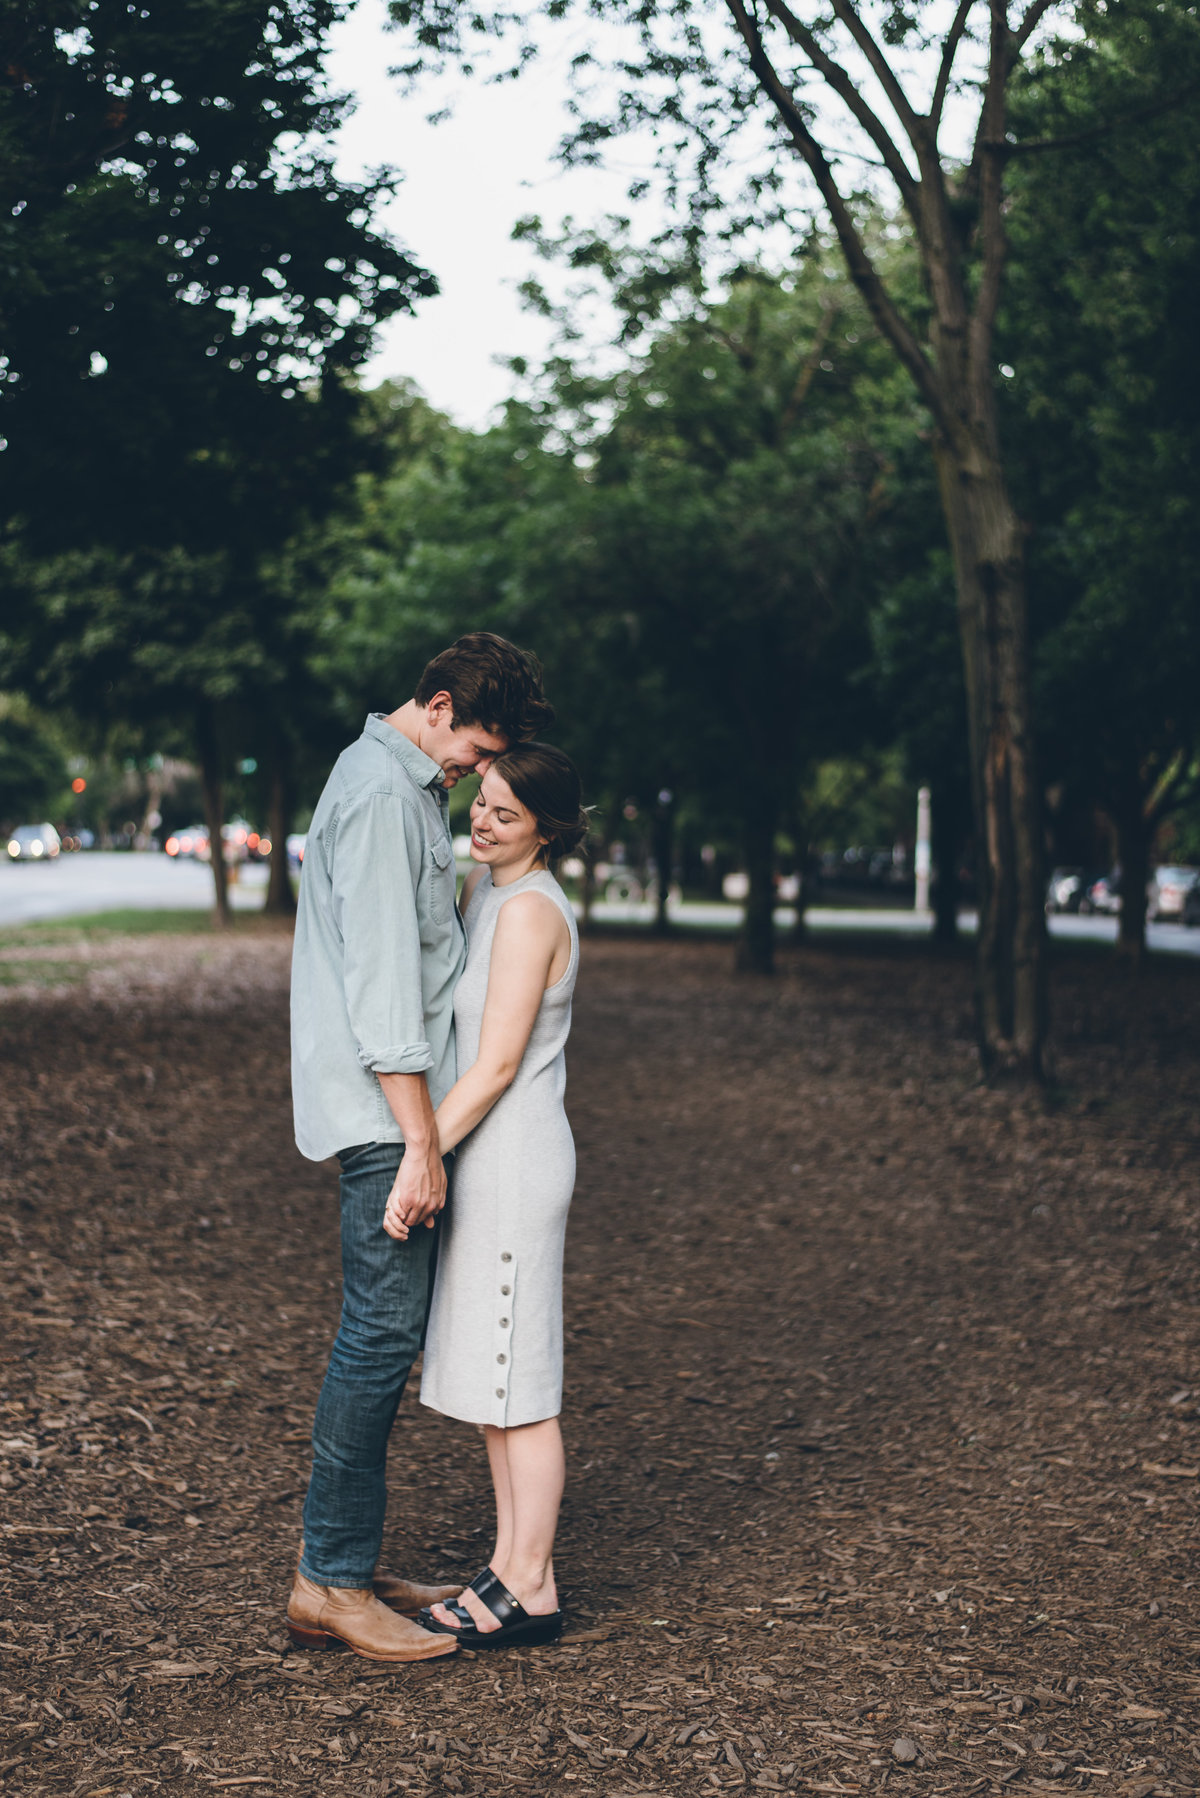 180725Morgan&ColeEngagement-1-180725_Morgan_Crouch_Cole_Wenzel_Engagement_Culled_0041-PS_Edit